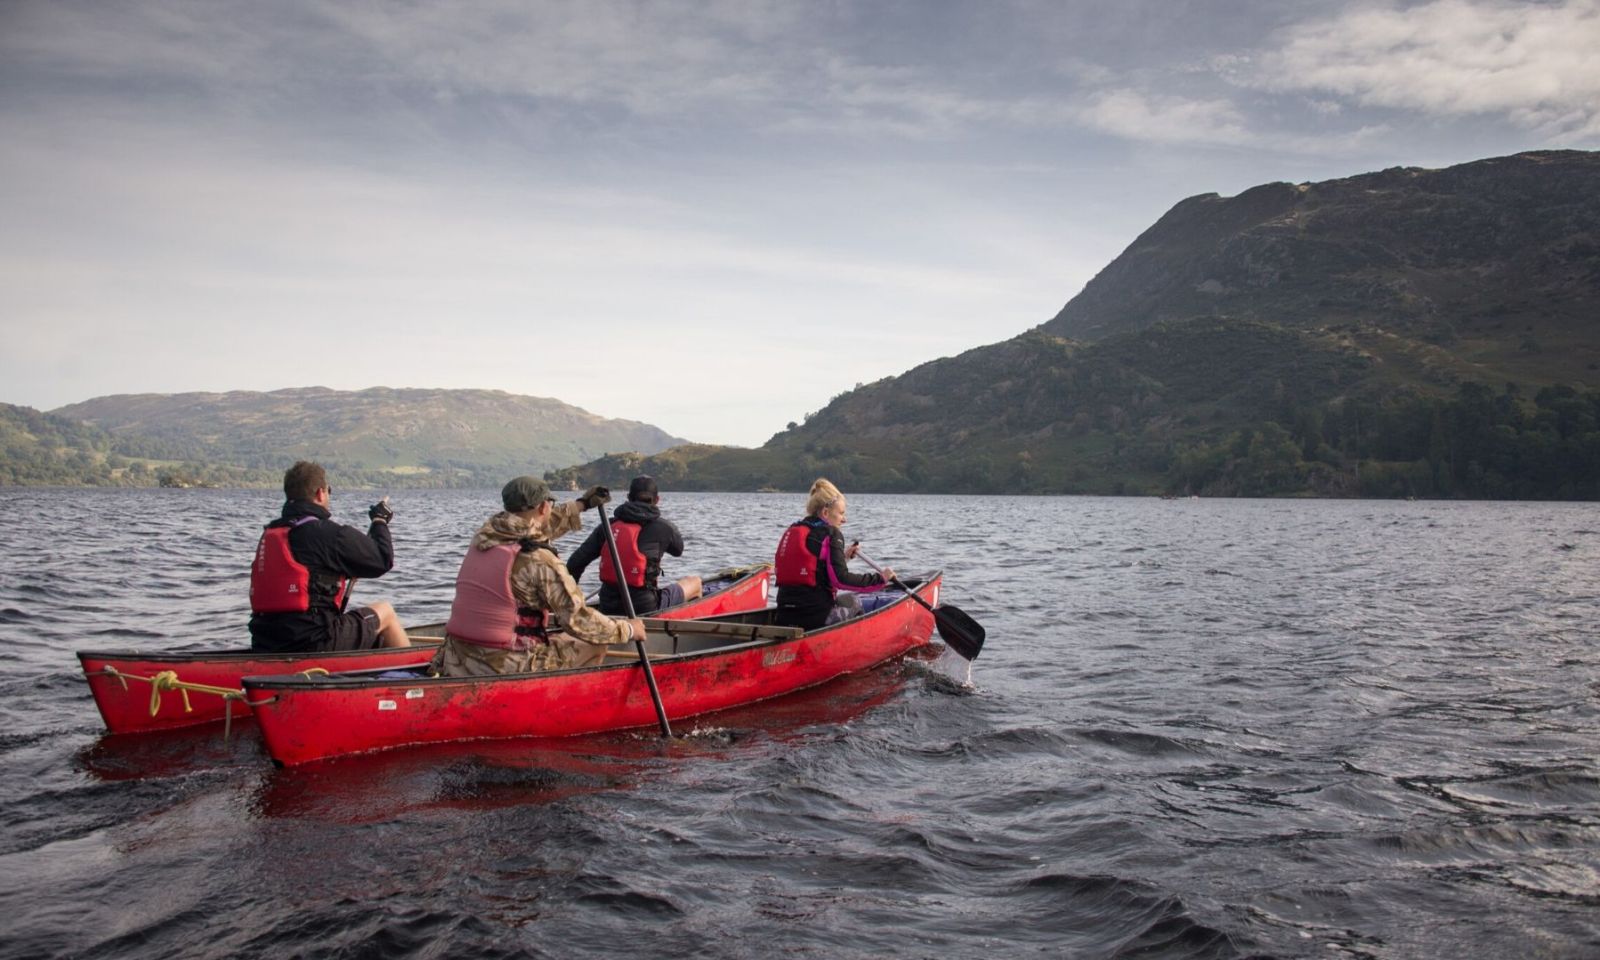 A group in canoes on Ullswater during a challenge event.